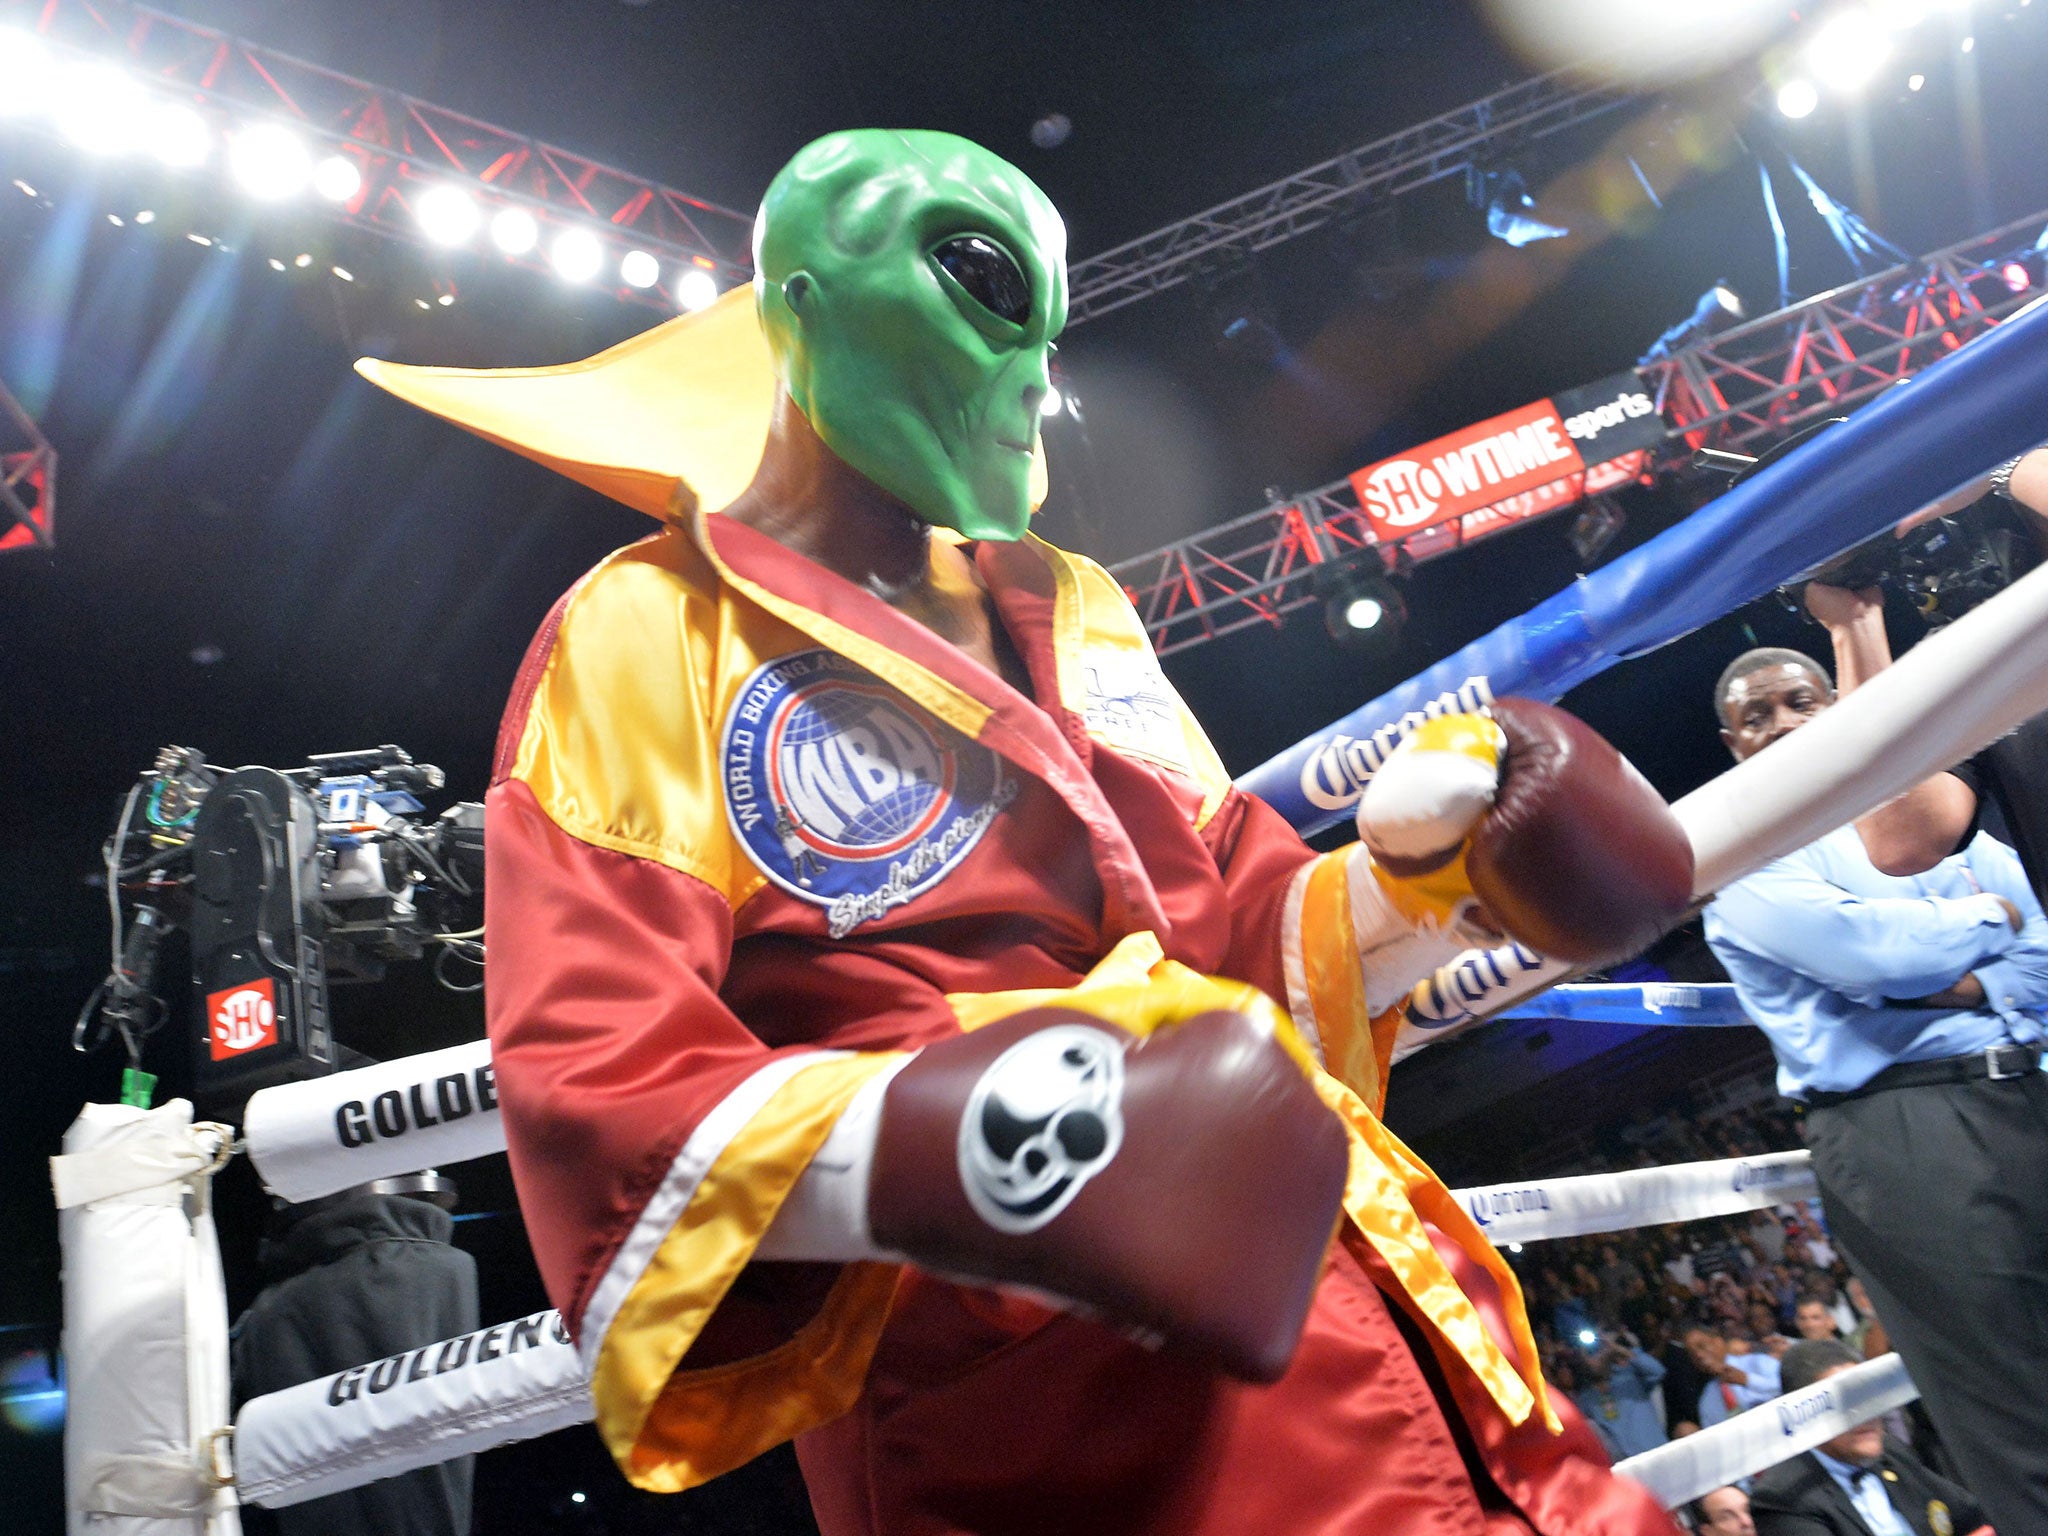 Hopkins enters the ring in his memorable 'Alien' mask